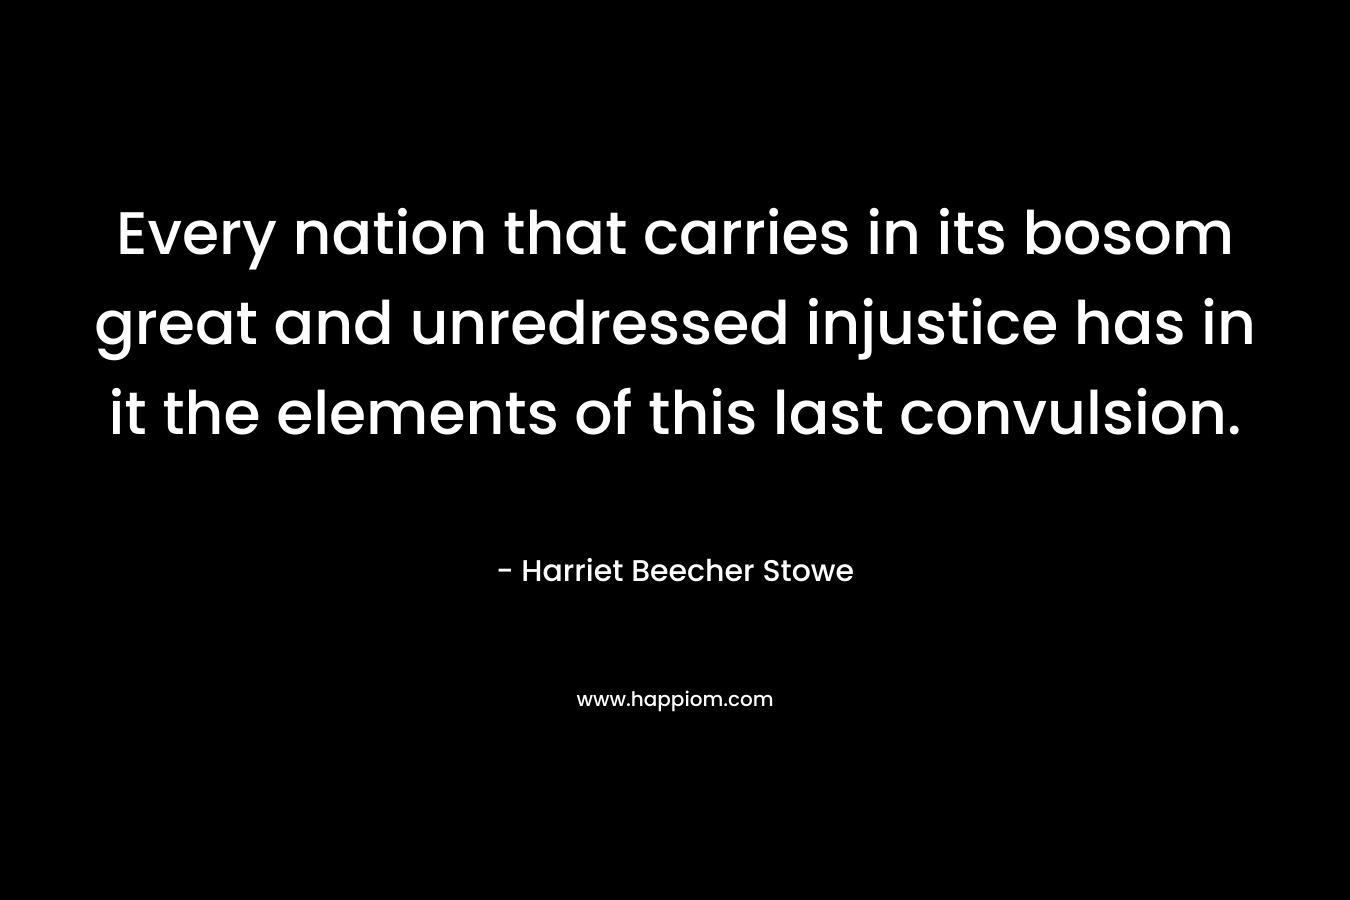 Every nation that carries in its bosom great and unredressed injustice has in it the elements of this last convulsion. – Harriet Beecher Stowe